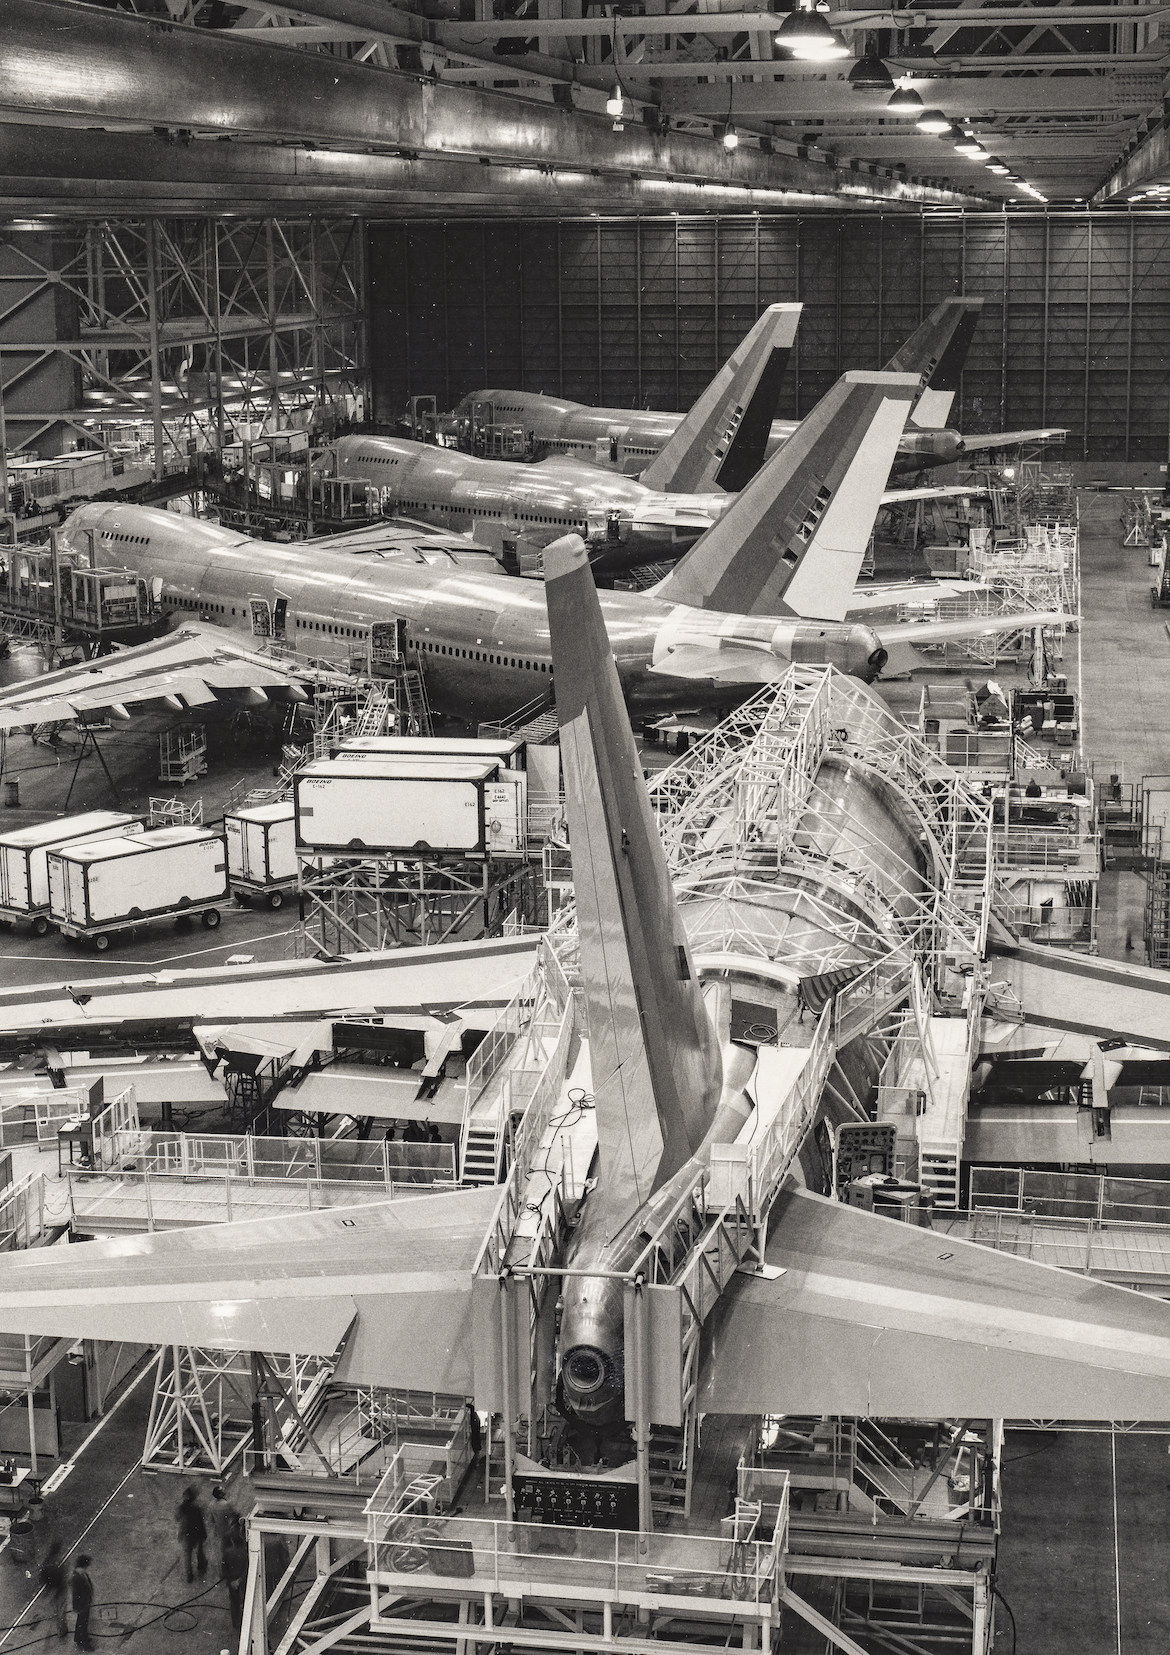 The 747 production line in Everett, Washington after the shift to the 10-window upper deck. (Boeing)